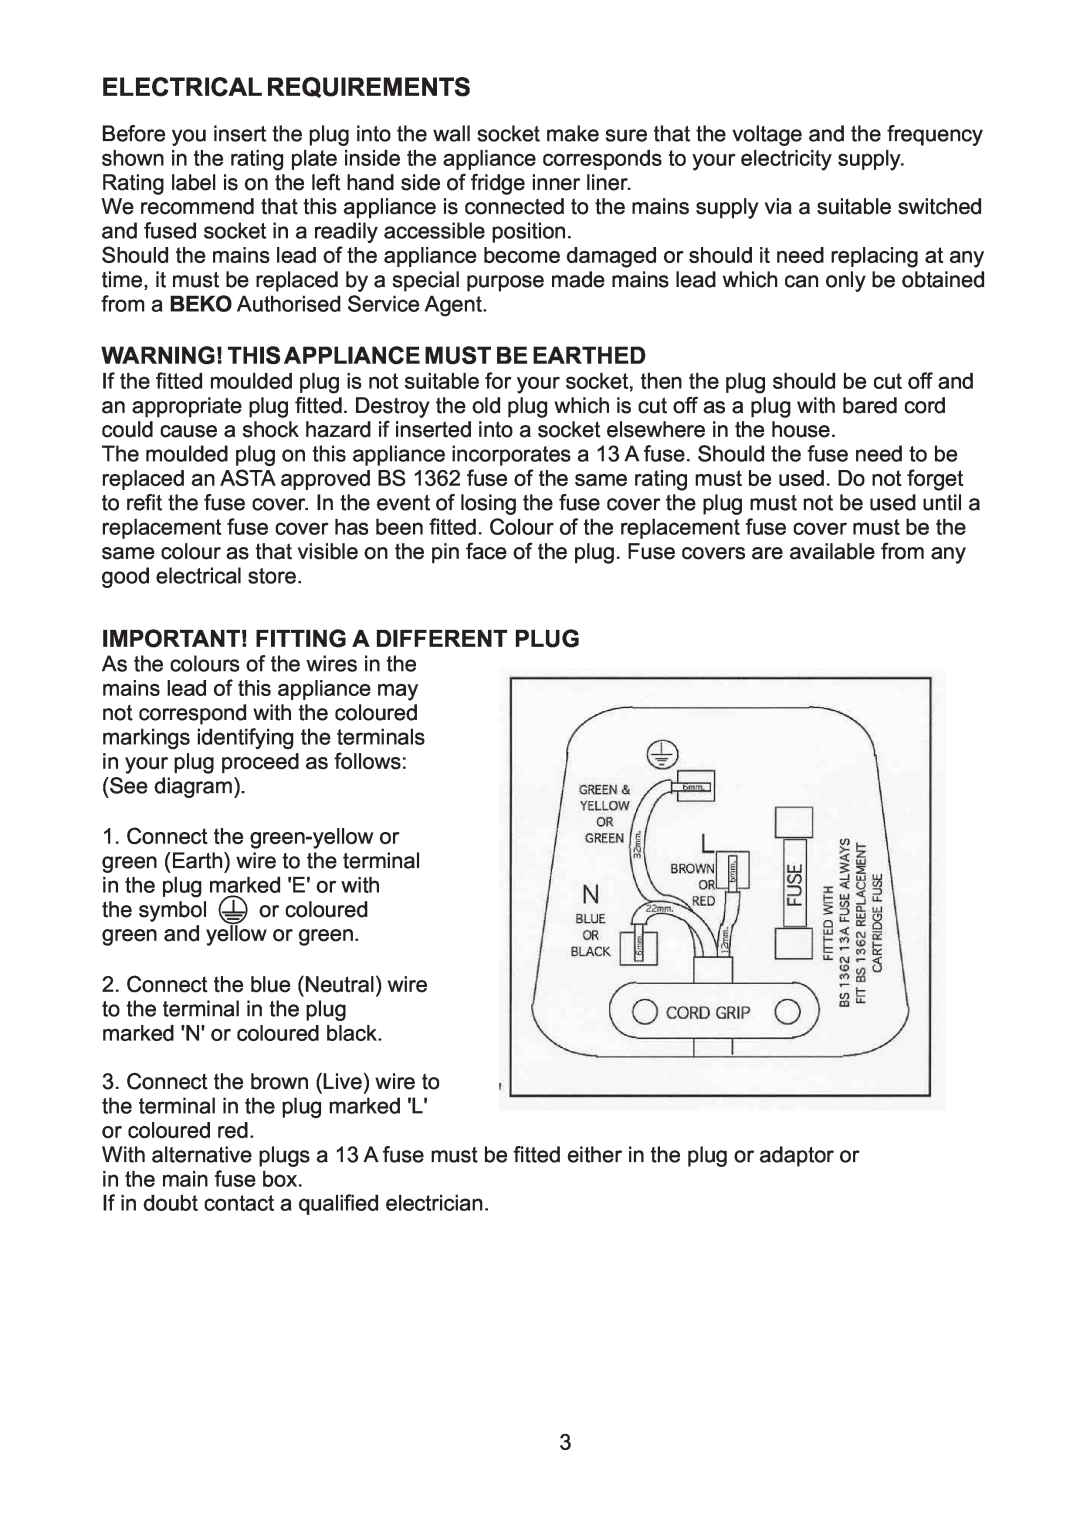 Beko CF5713AP manual Electrical Requirements, Warning! This Appliance Must Be Earthed, Important!Fitting A Differentplug 